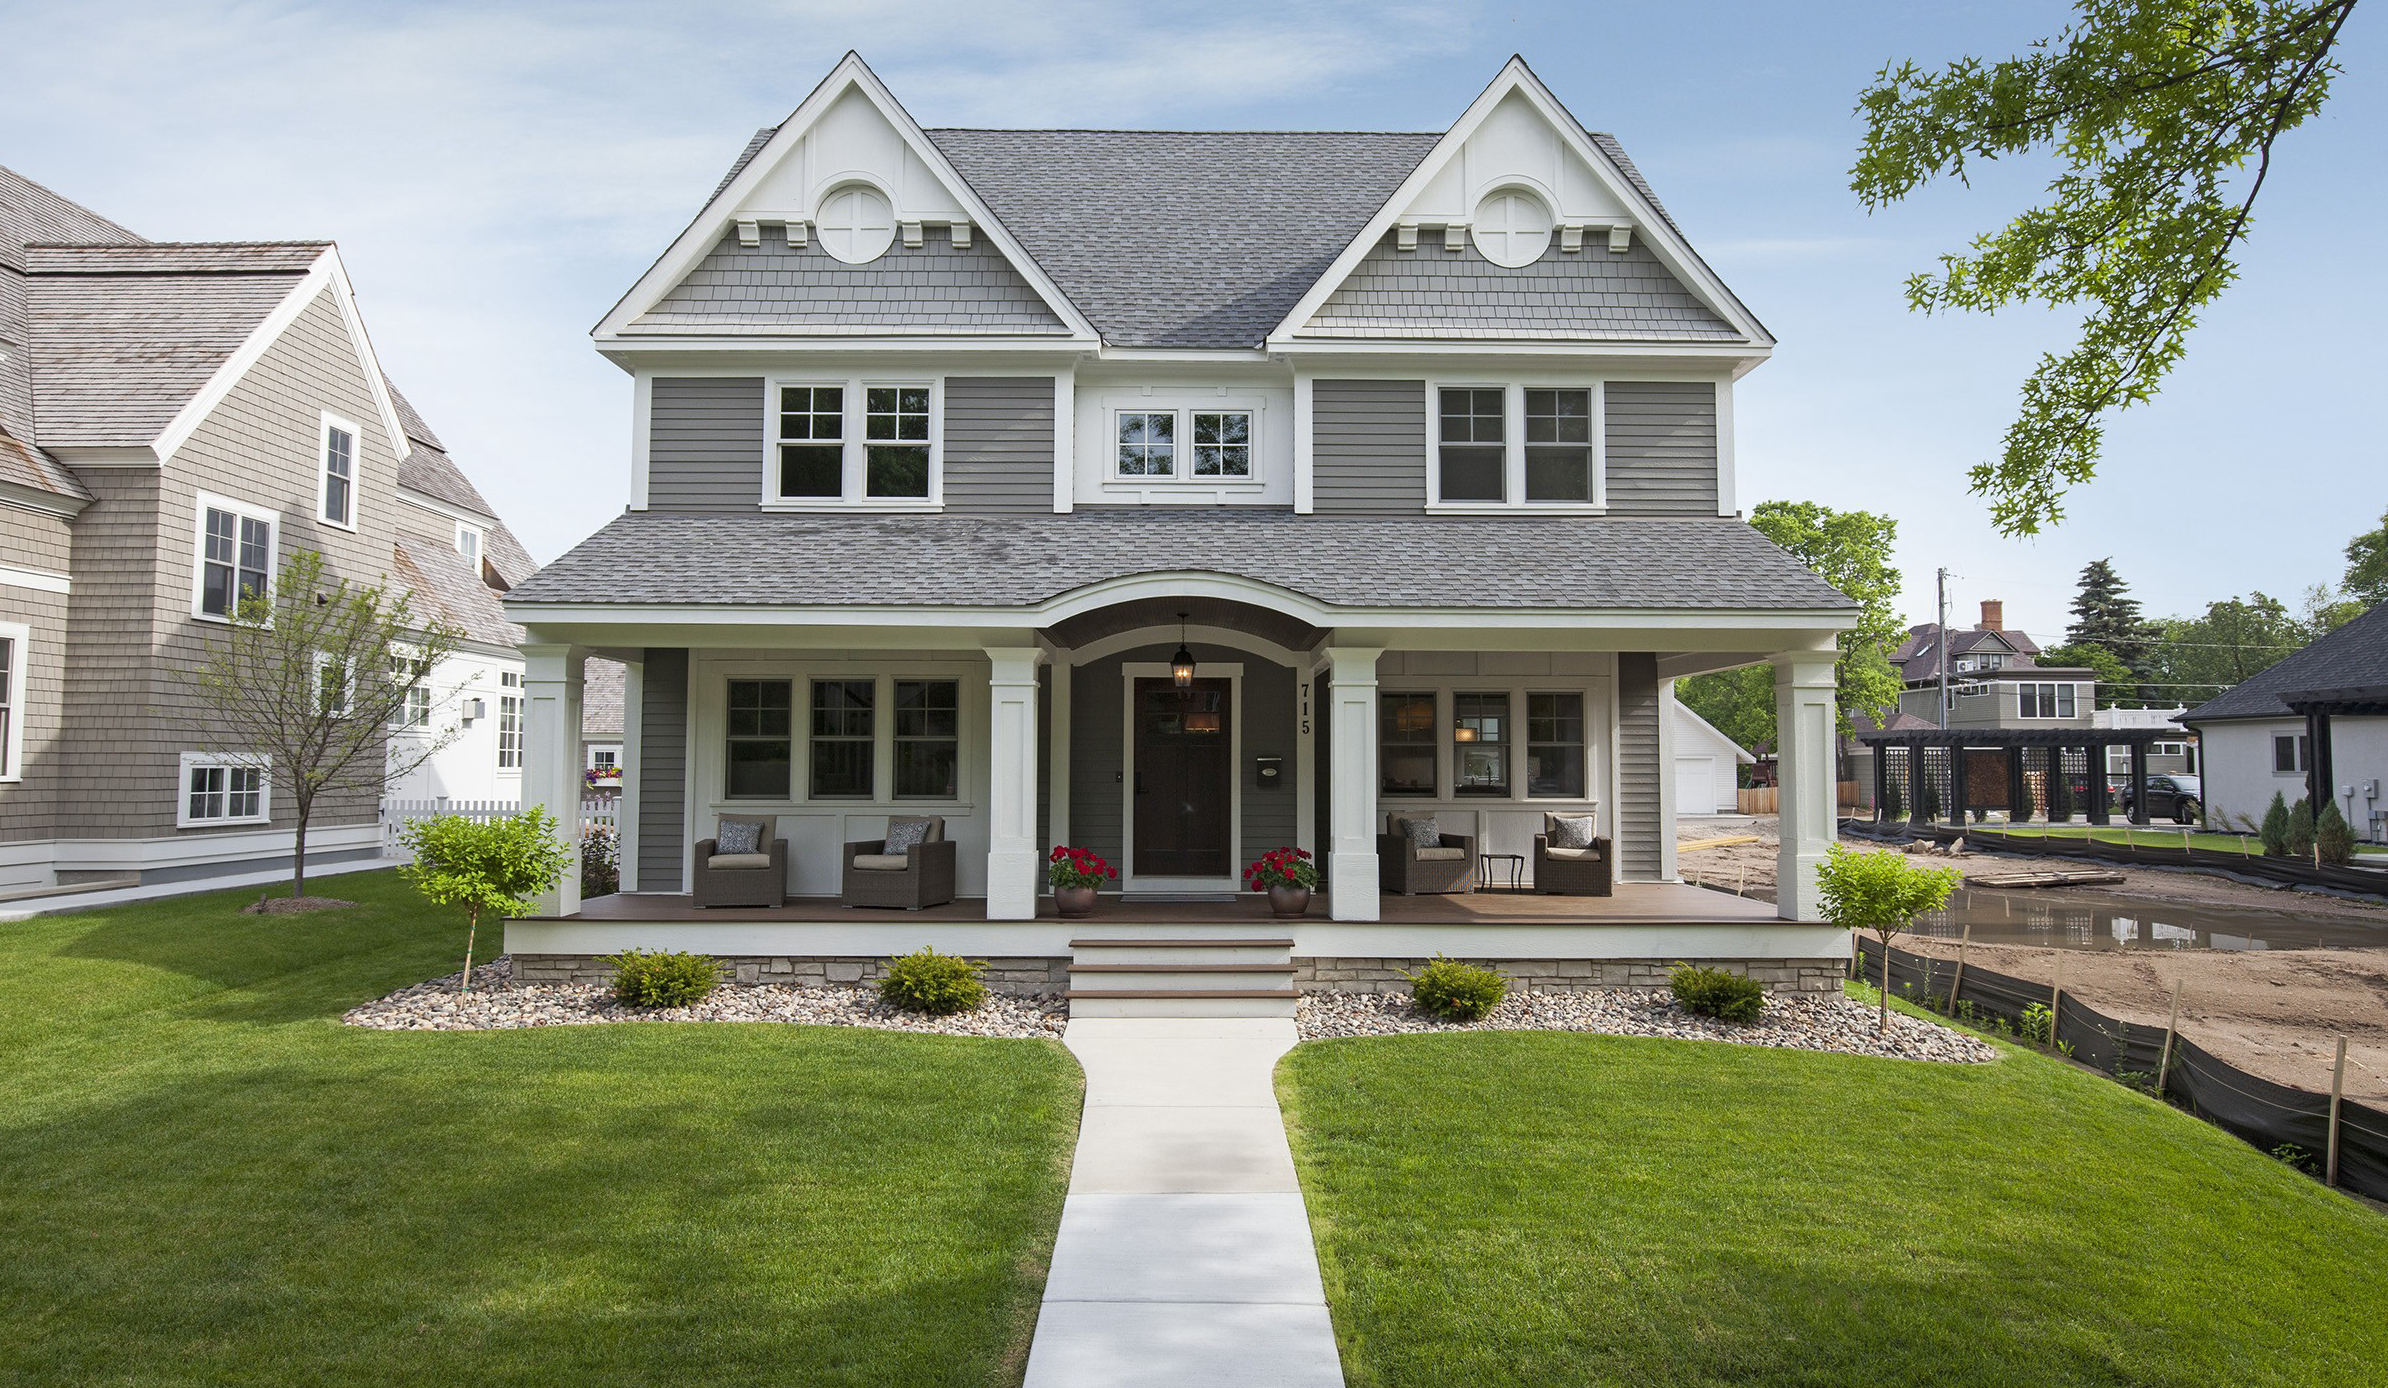 Home Exterior: Boost Your Home’s Curb Appeal (and Value)